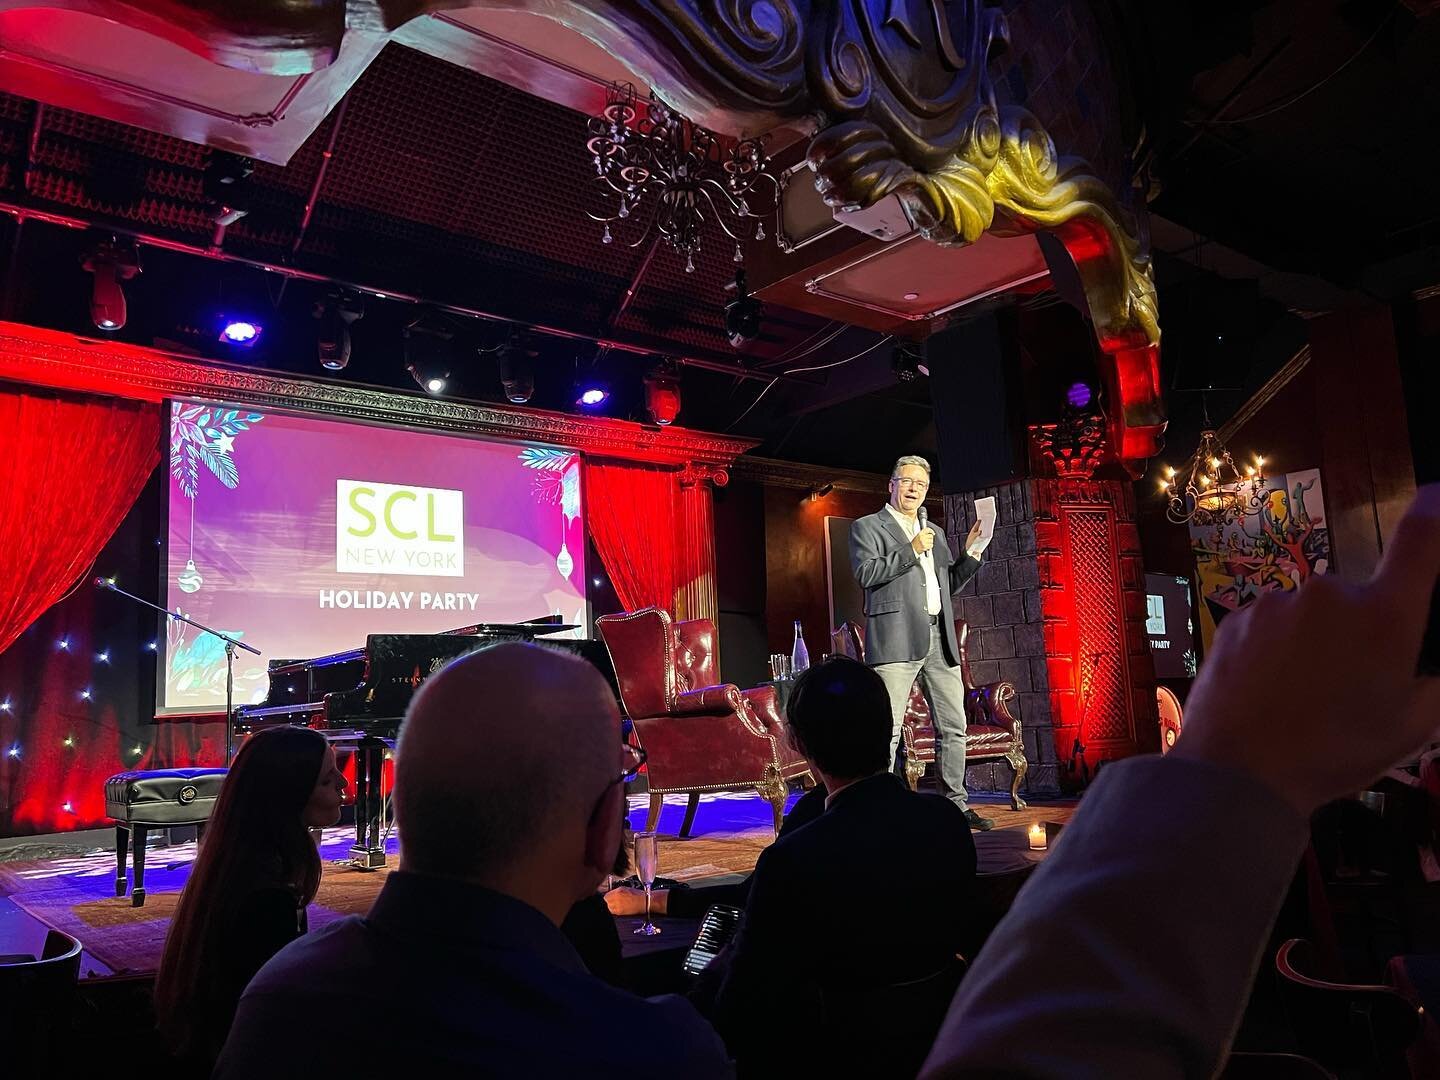 Still thinking about the #SCLNY Holiday Party last night&hellip; it was great seeing and connecting with a ton of great friends and talented colleagues again, meeting new folks, and hearing some fantastic insight from the night&rsquo;s honoree, Nicho